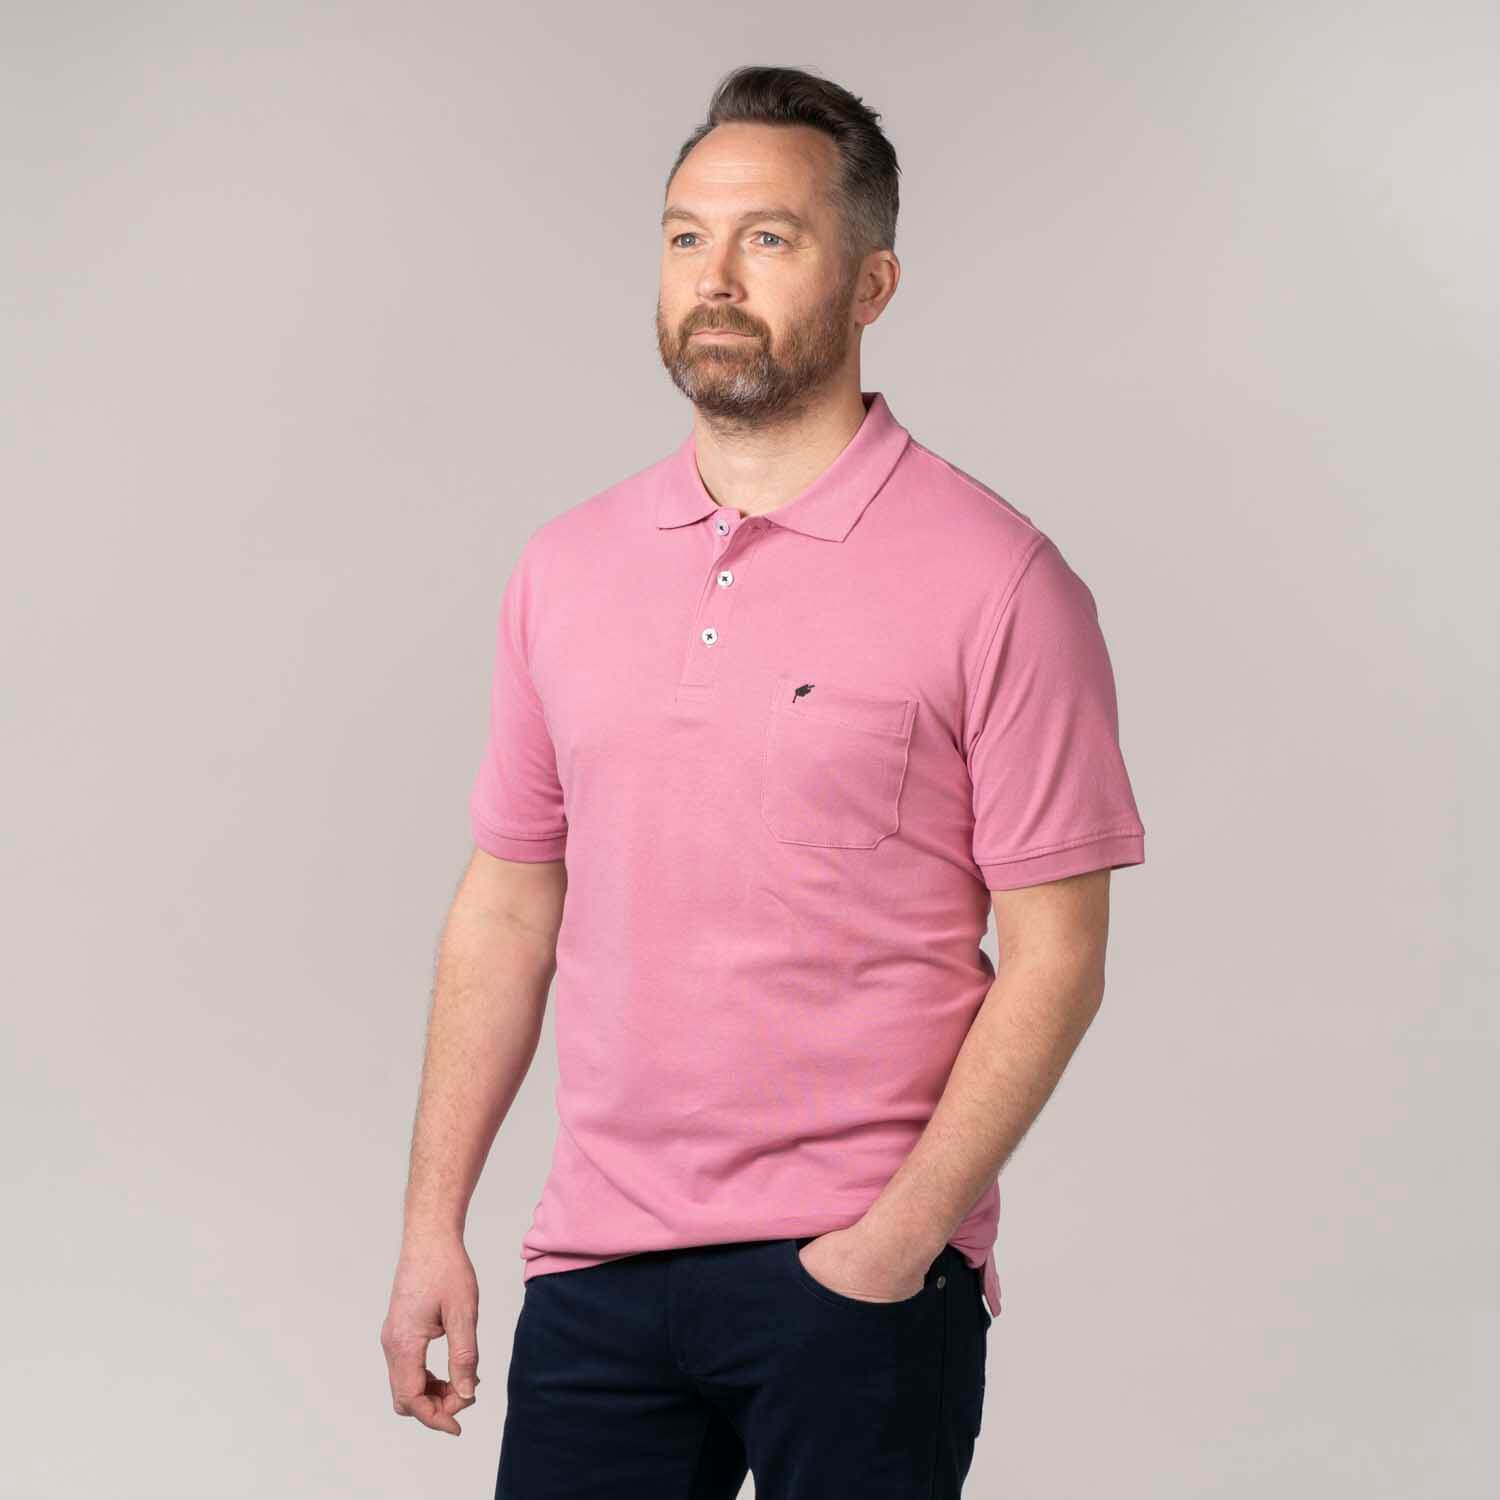 Yeats Niels Short-sleeve Polo - Dusty Rose 3 Shaws Department Stores